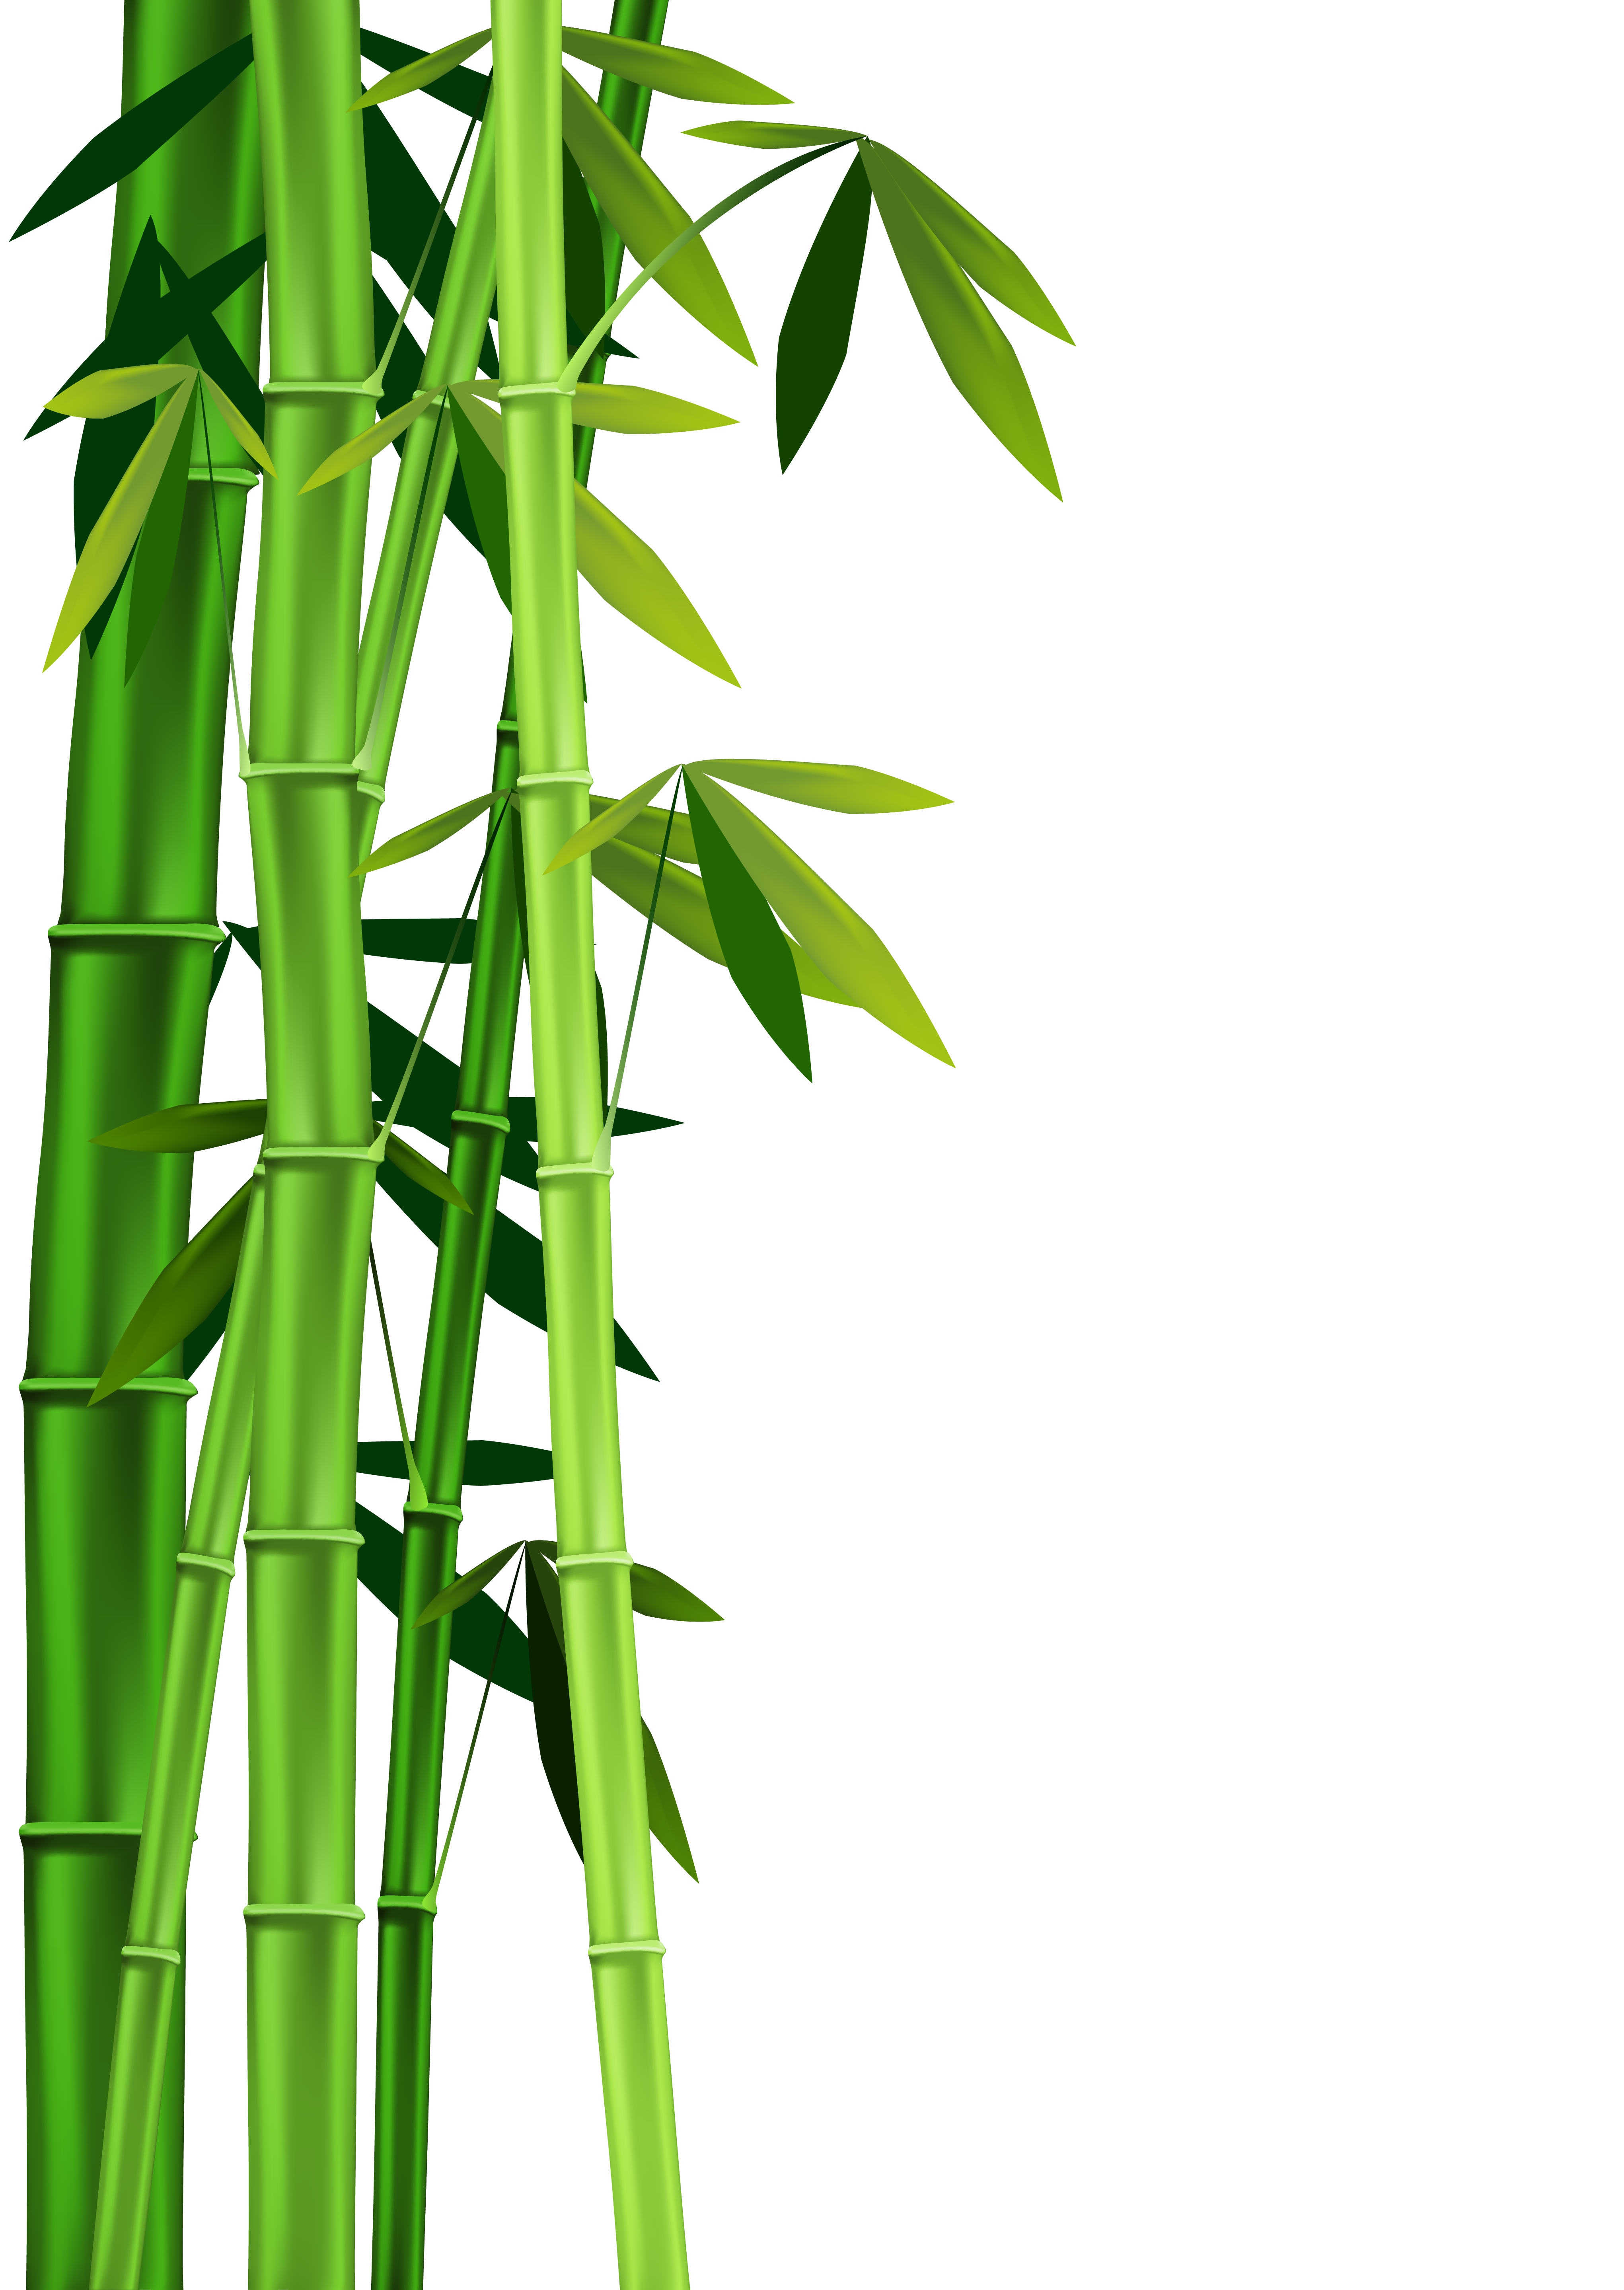 Bamboo Clipart Bamboo Leaf Picture Bamboo Clipart Bamboo Leaf